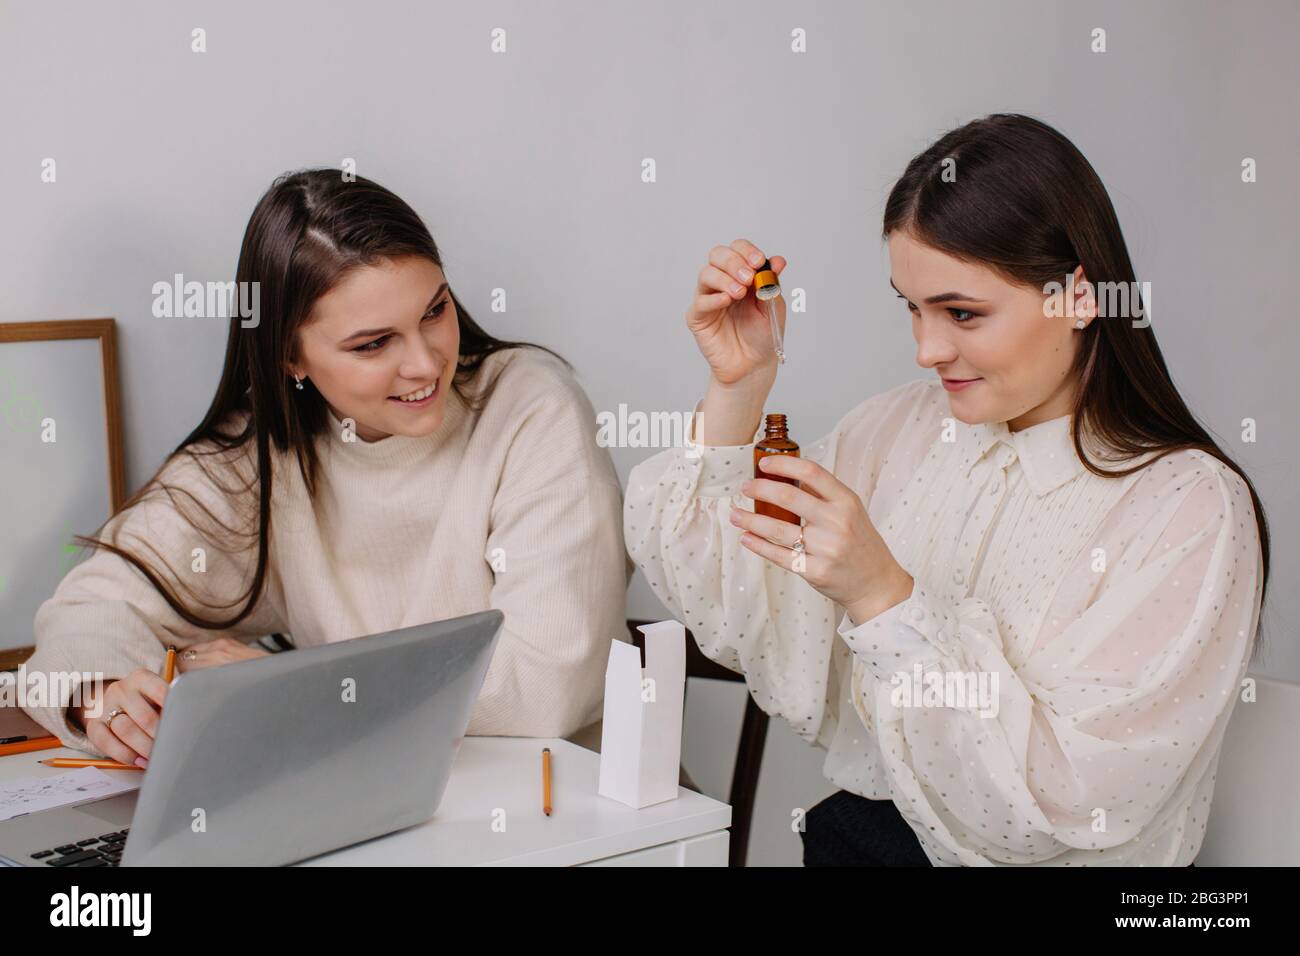 Two women working with essential oils Stock Photo